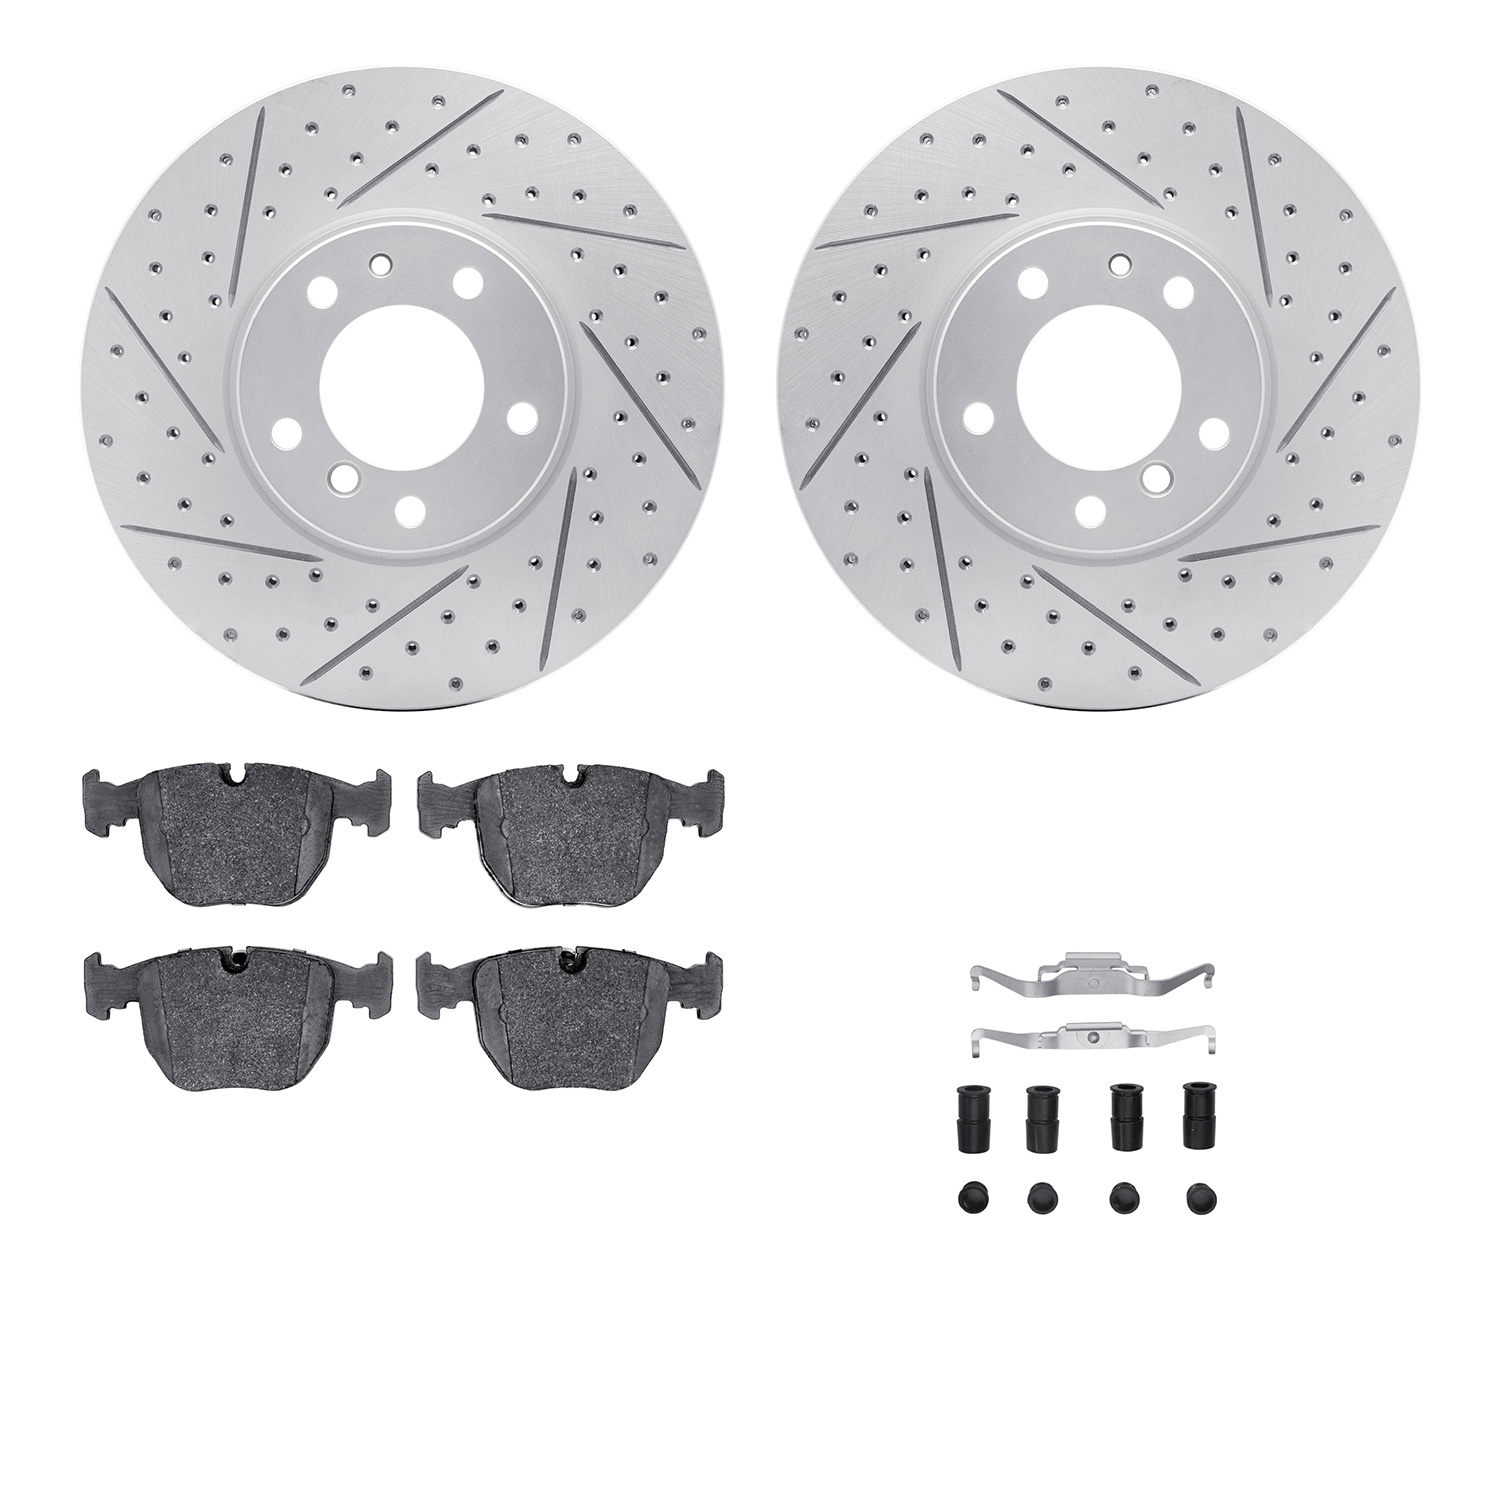 2512-31011 Geoperformance Drilled/Slotted Rotors w/5000 Advanced Brake Pads Kit & Hardware, 2000-2000 BMW, Position: Front